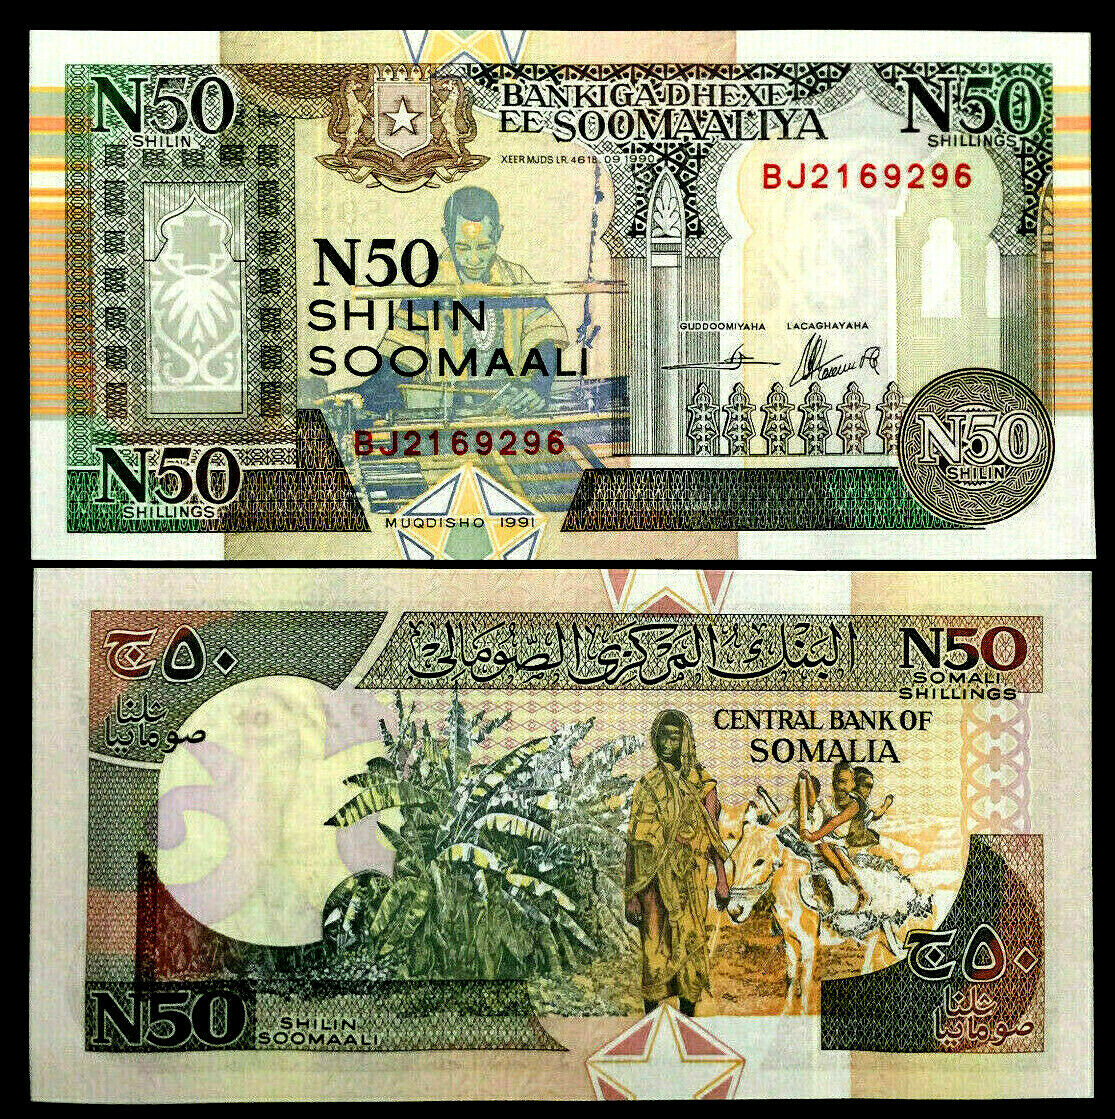 Somalia 50 Shillings 1991 Banknote World Paper Money Unc Currency Bill Note